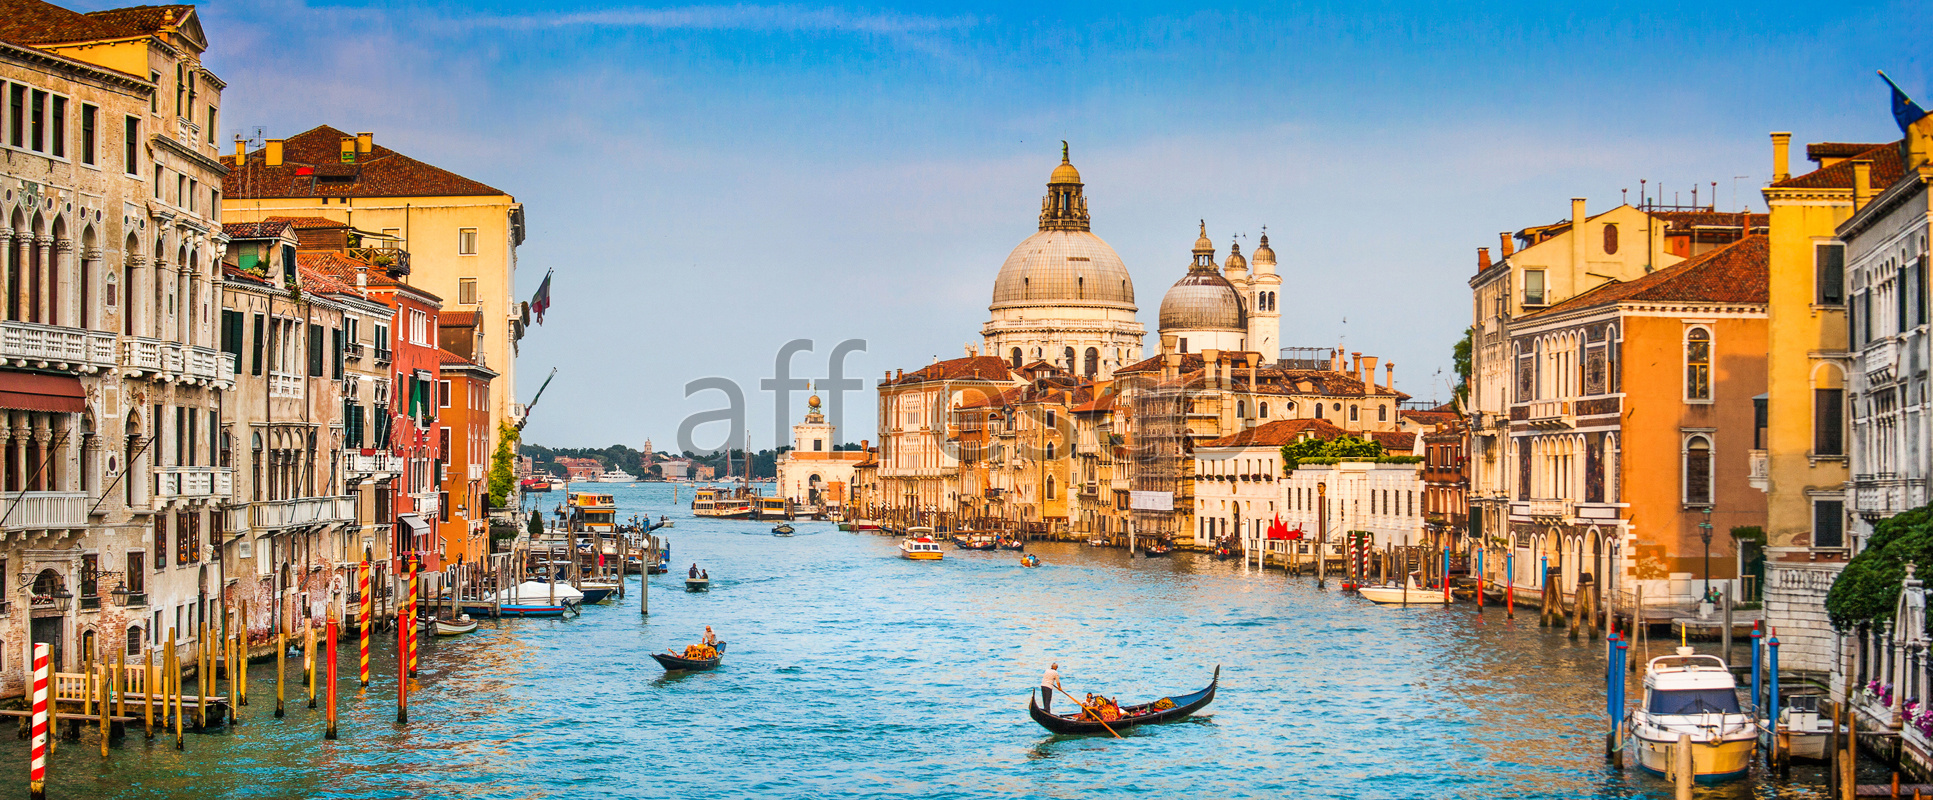 ID13488 | Pictures of Cities  | Venice panoramic view | Affresco Factory